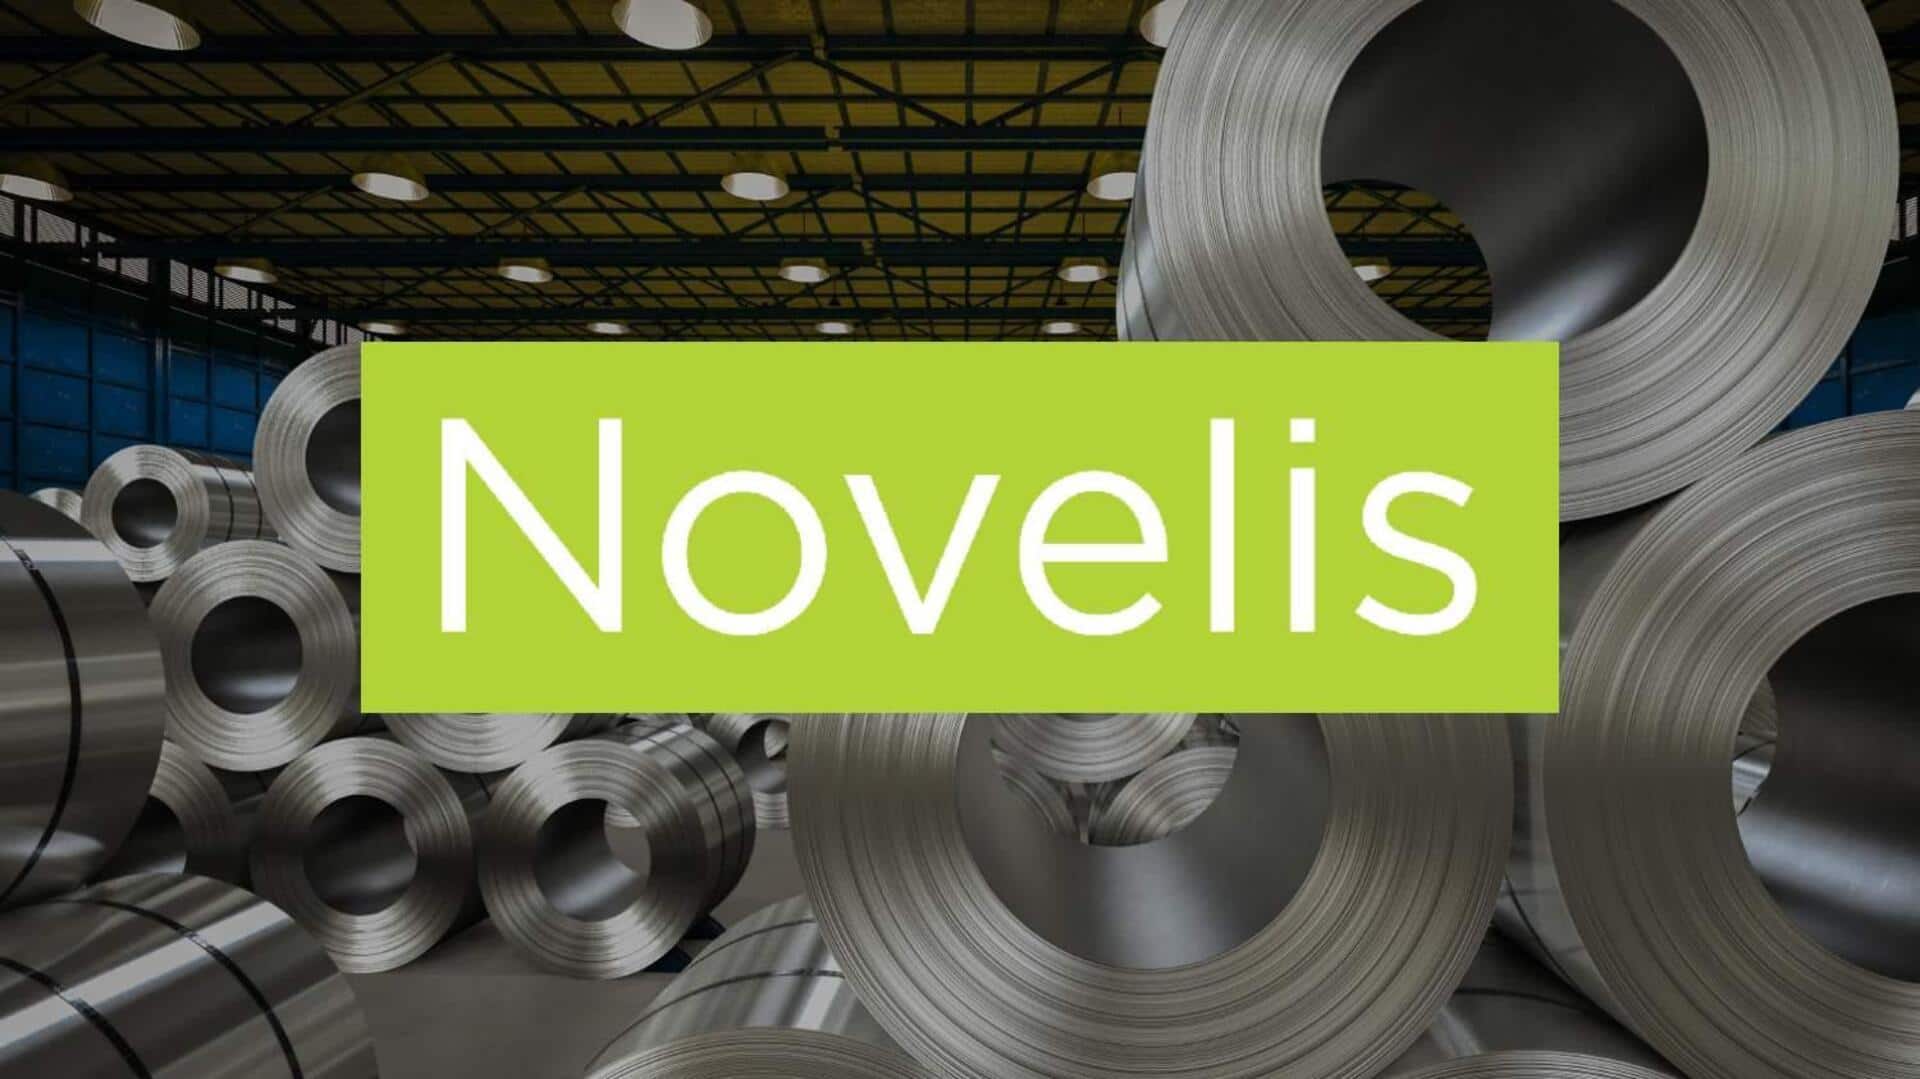 Hindalco-owned Novelis aims for $12.6 billion valuation with US IPO